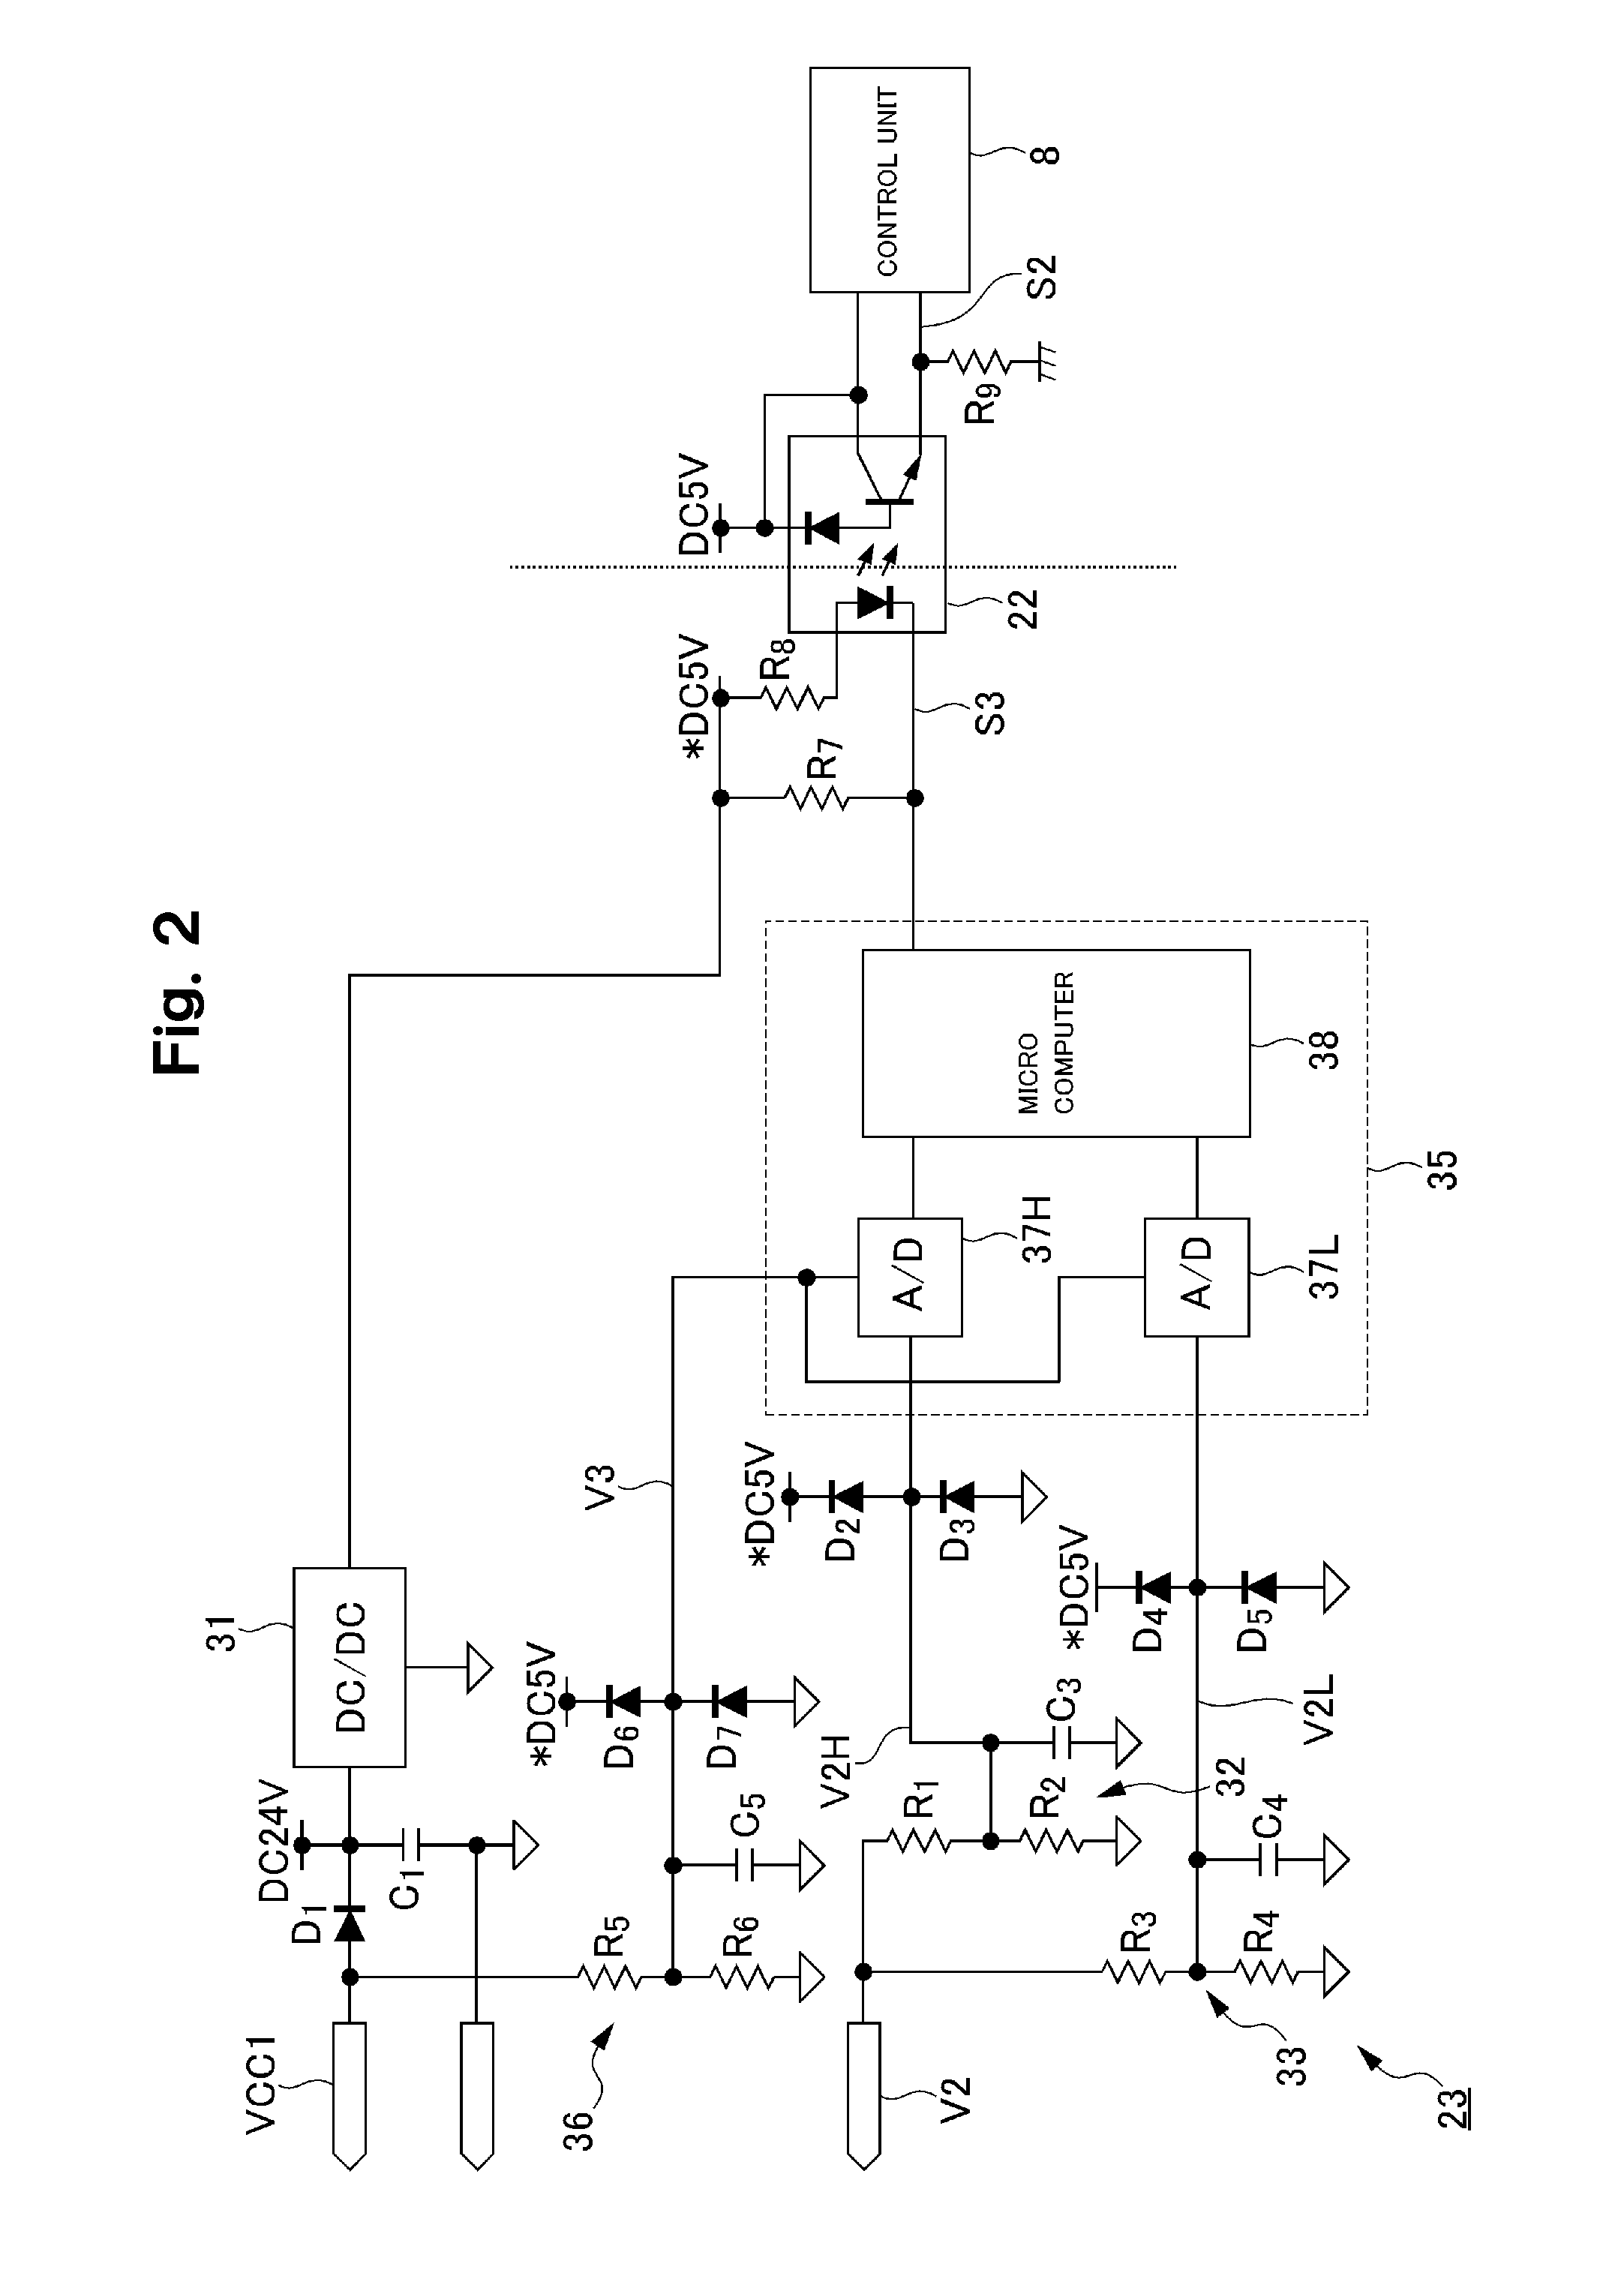 Motor driving device